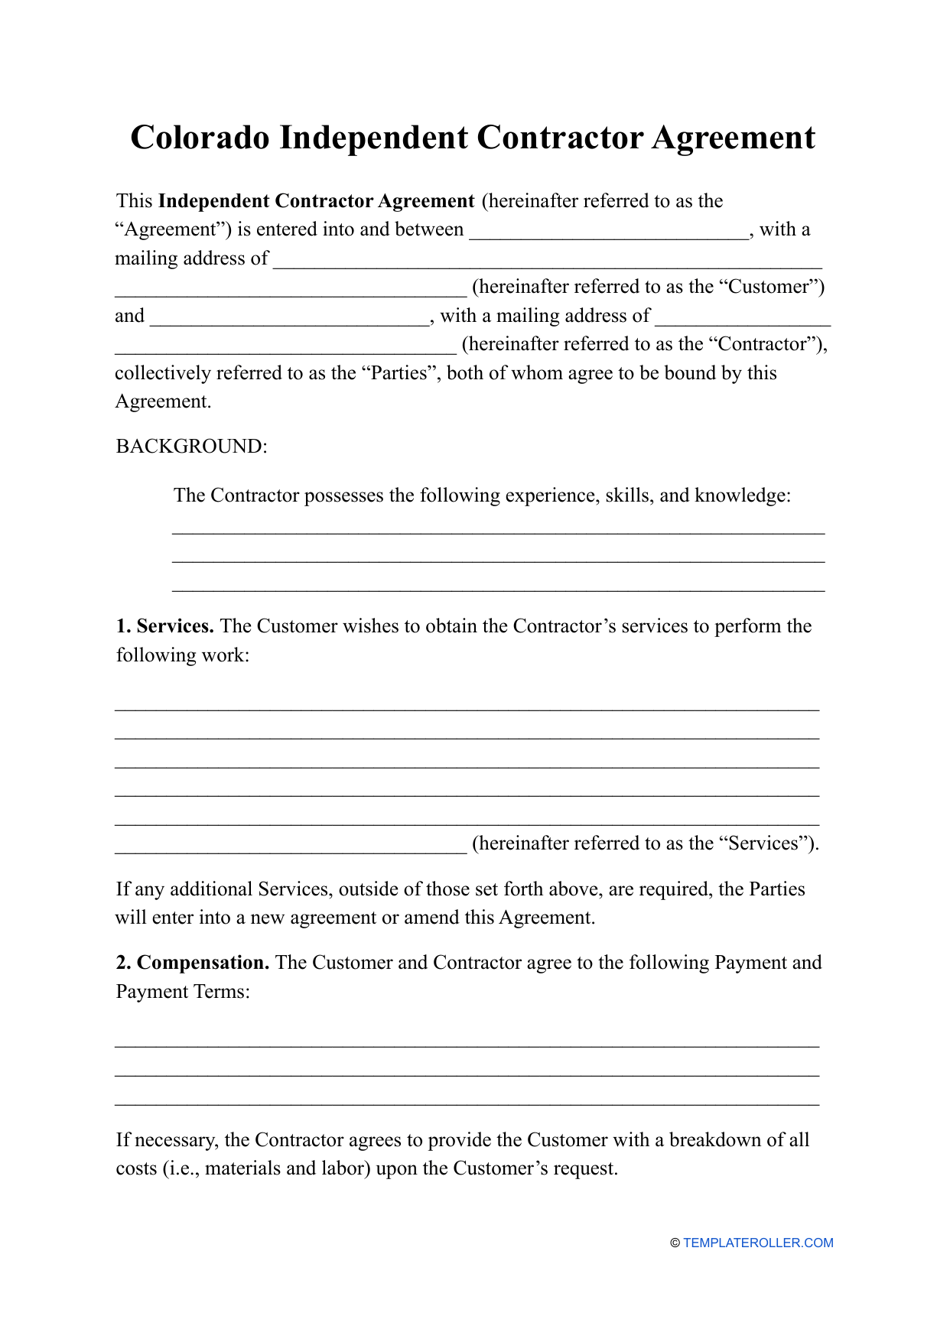 Independent Contractor Agreement Template - Colorado, Page 1